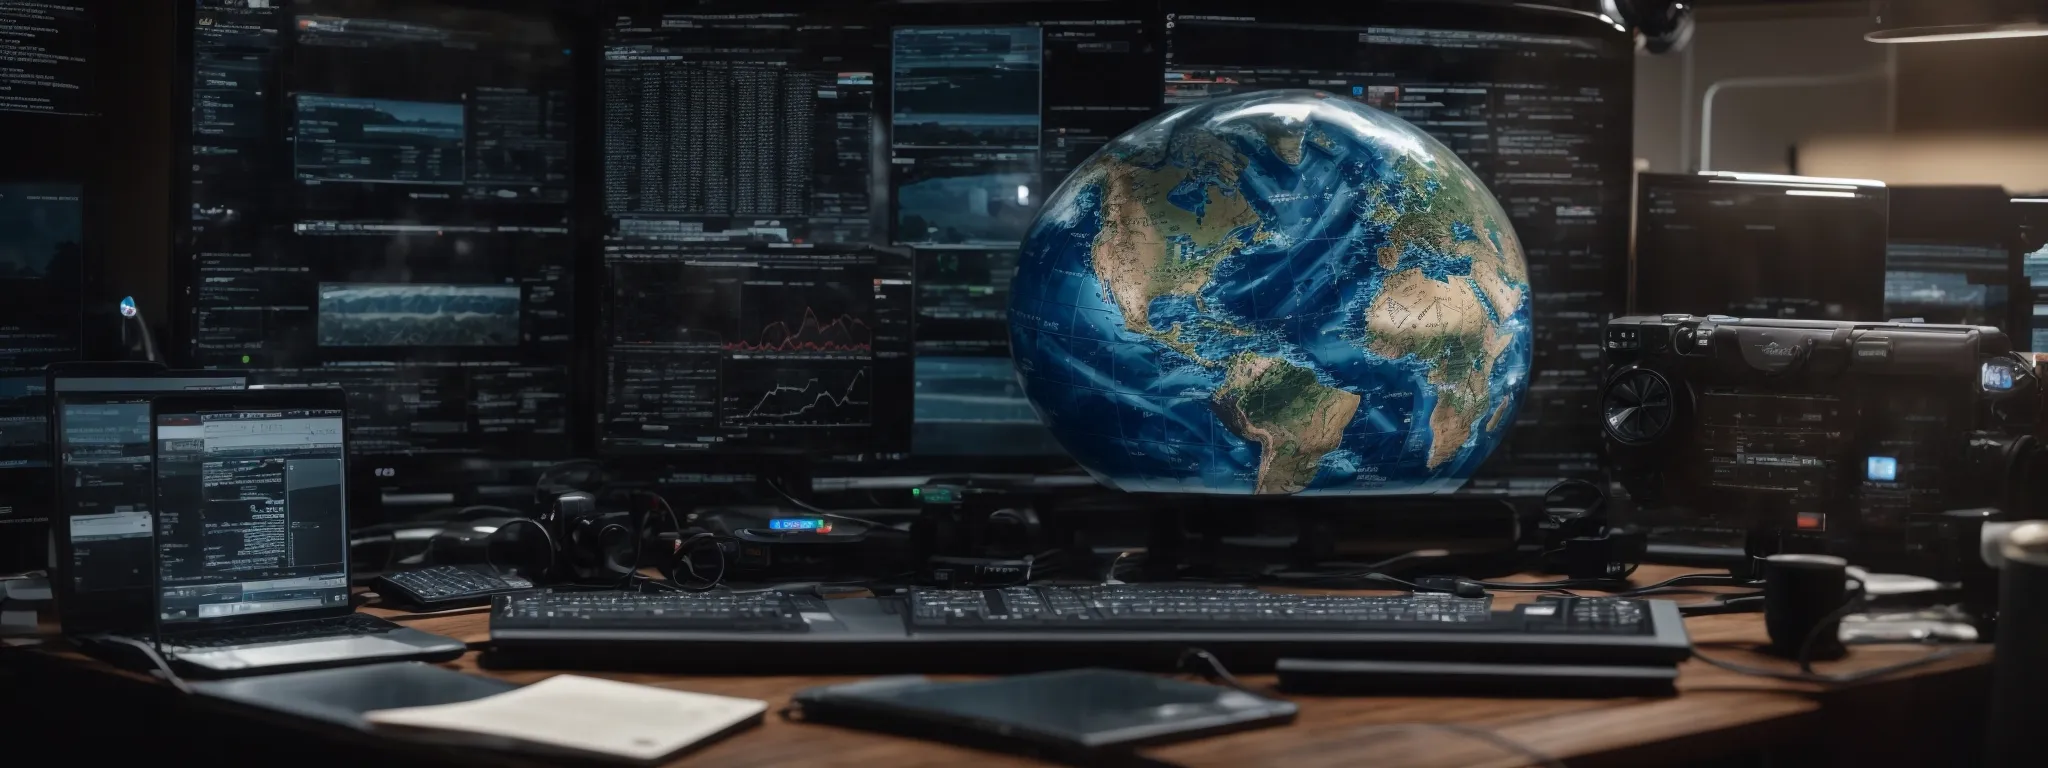 a planet earth globe surrounded by multiple digital devices displaying graphs and webpages.